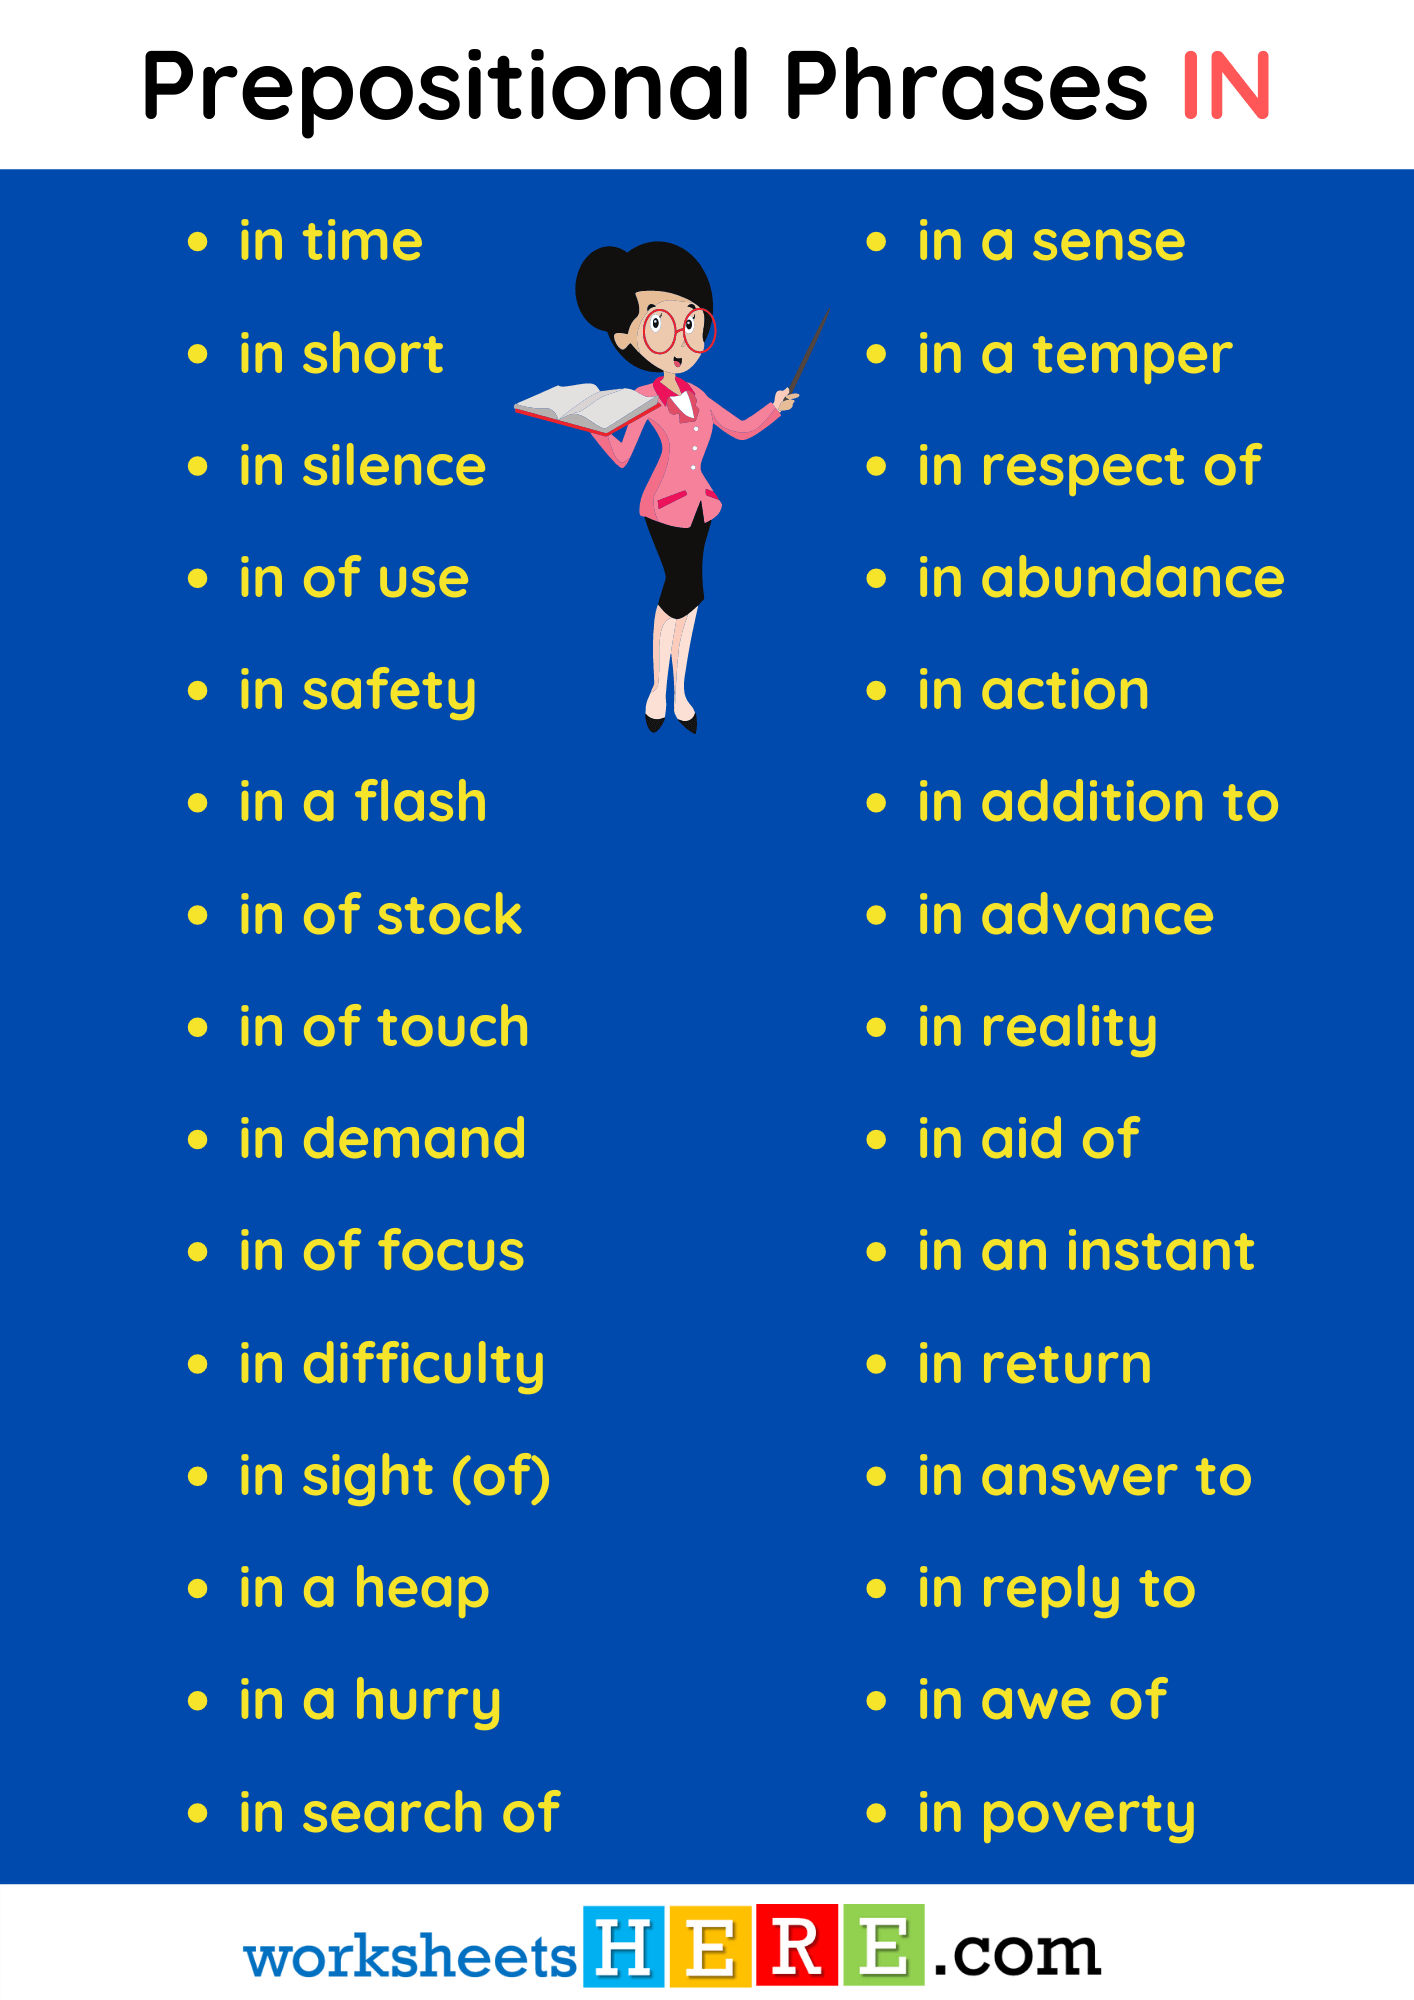 Prepositional Phrases IN Examples PDF Worksheet For Students and Kids